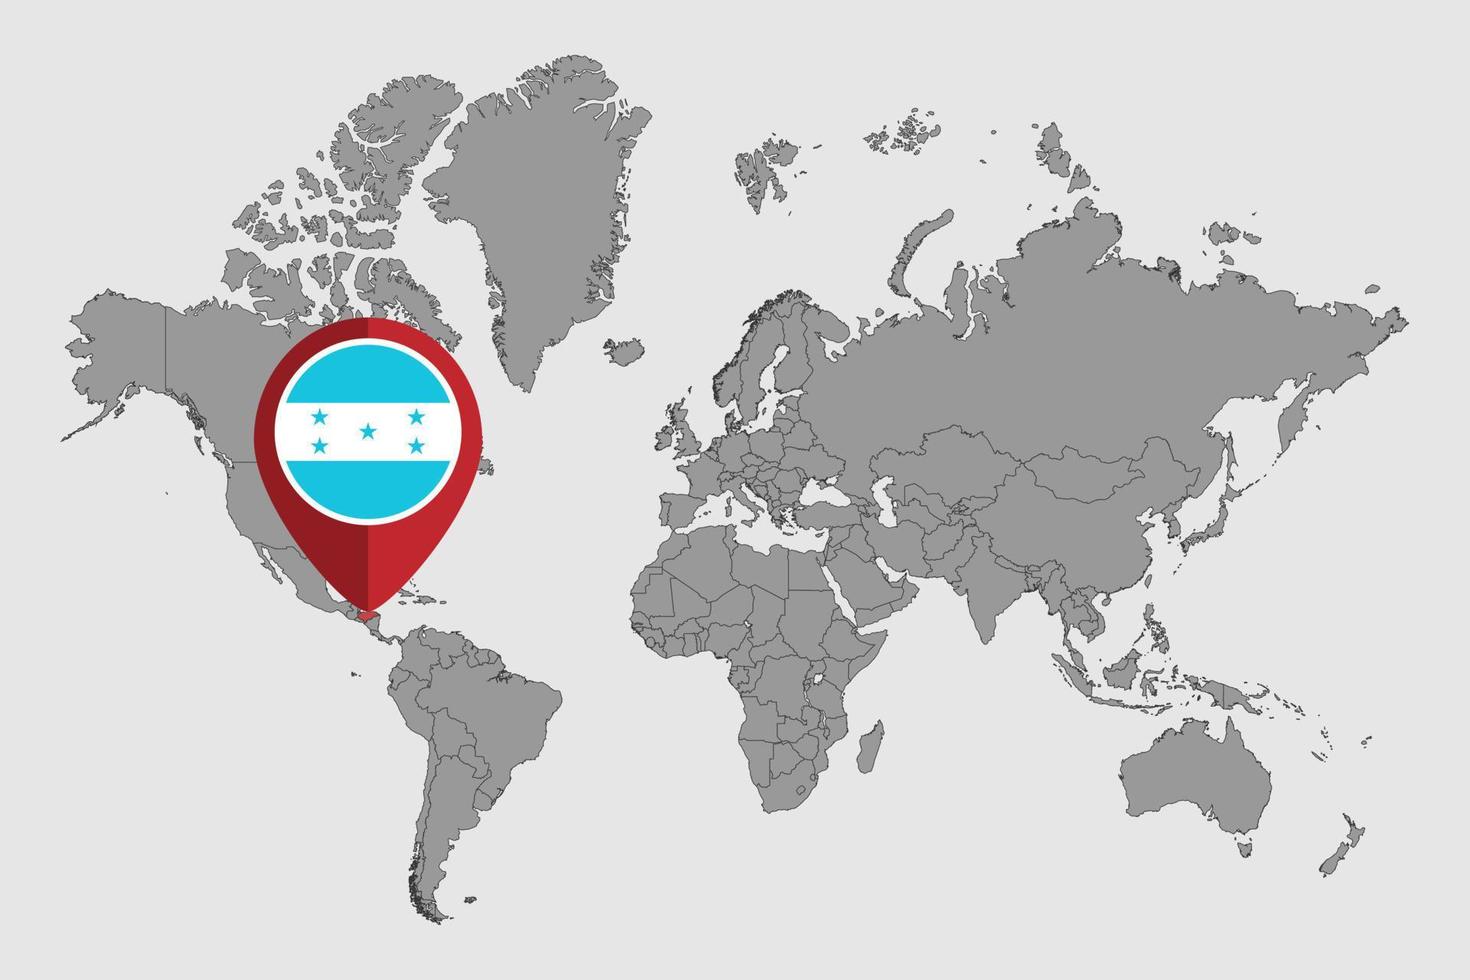 Pin map with Honduras flag on world map. Vector illustration.